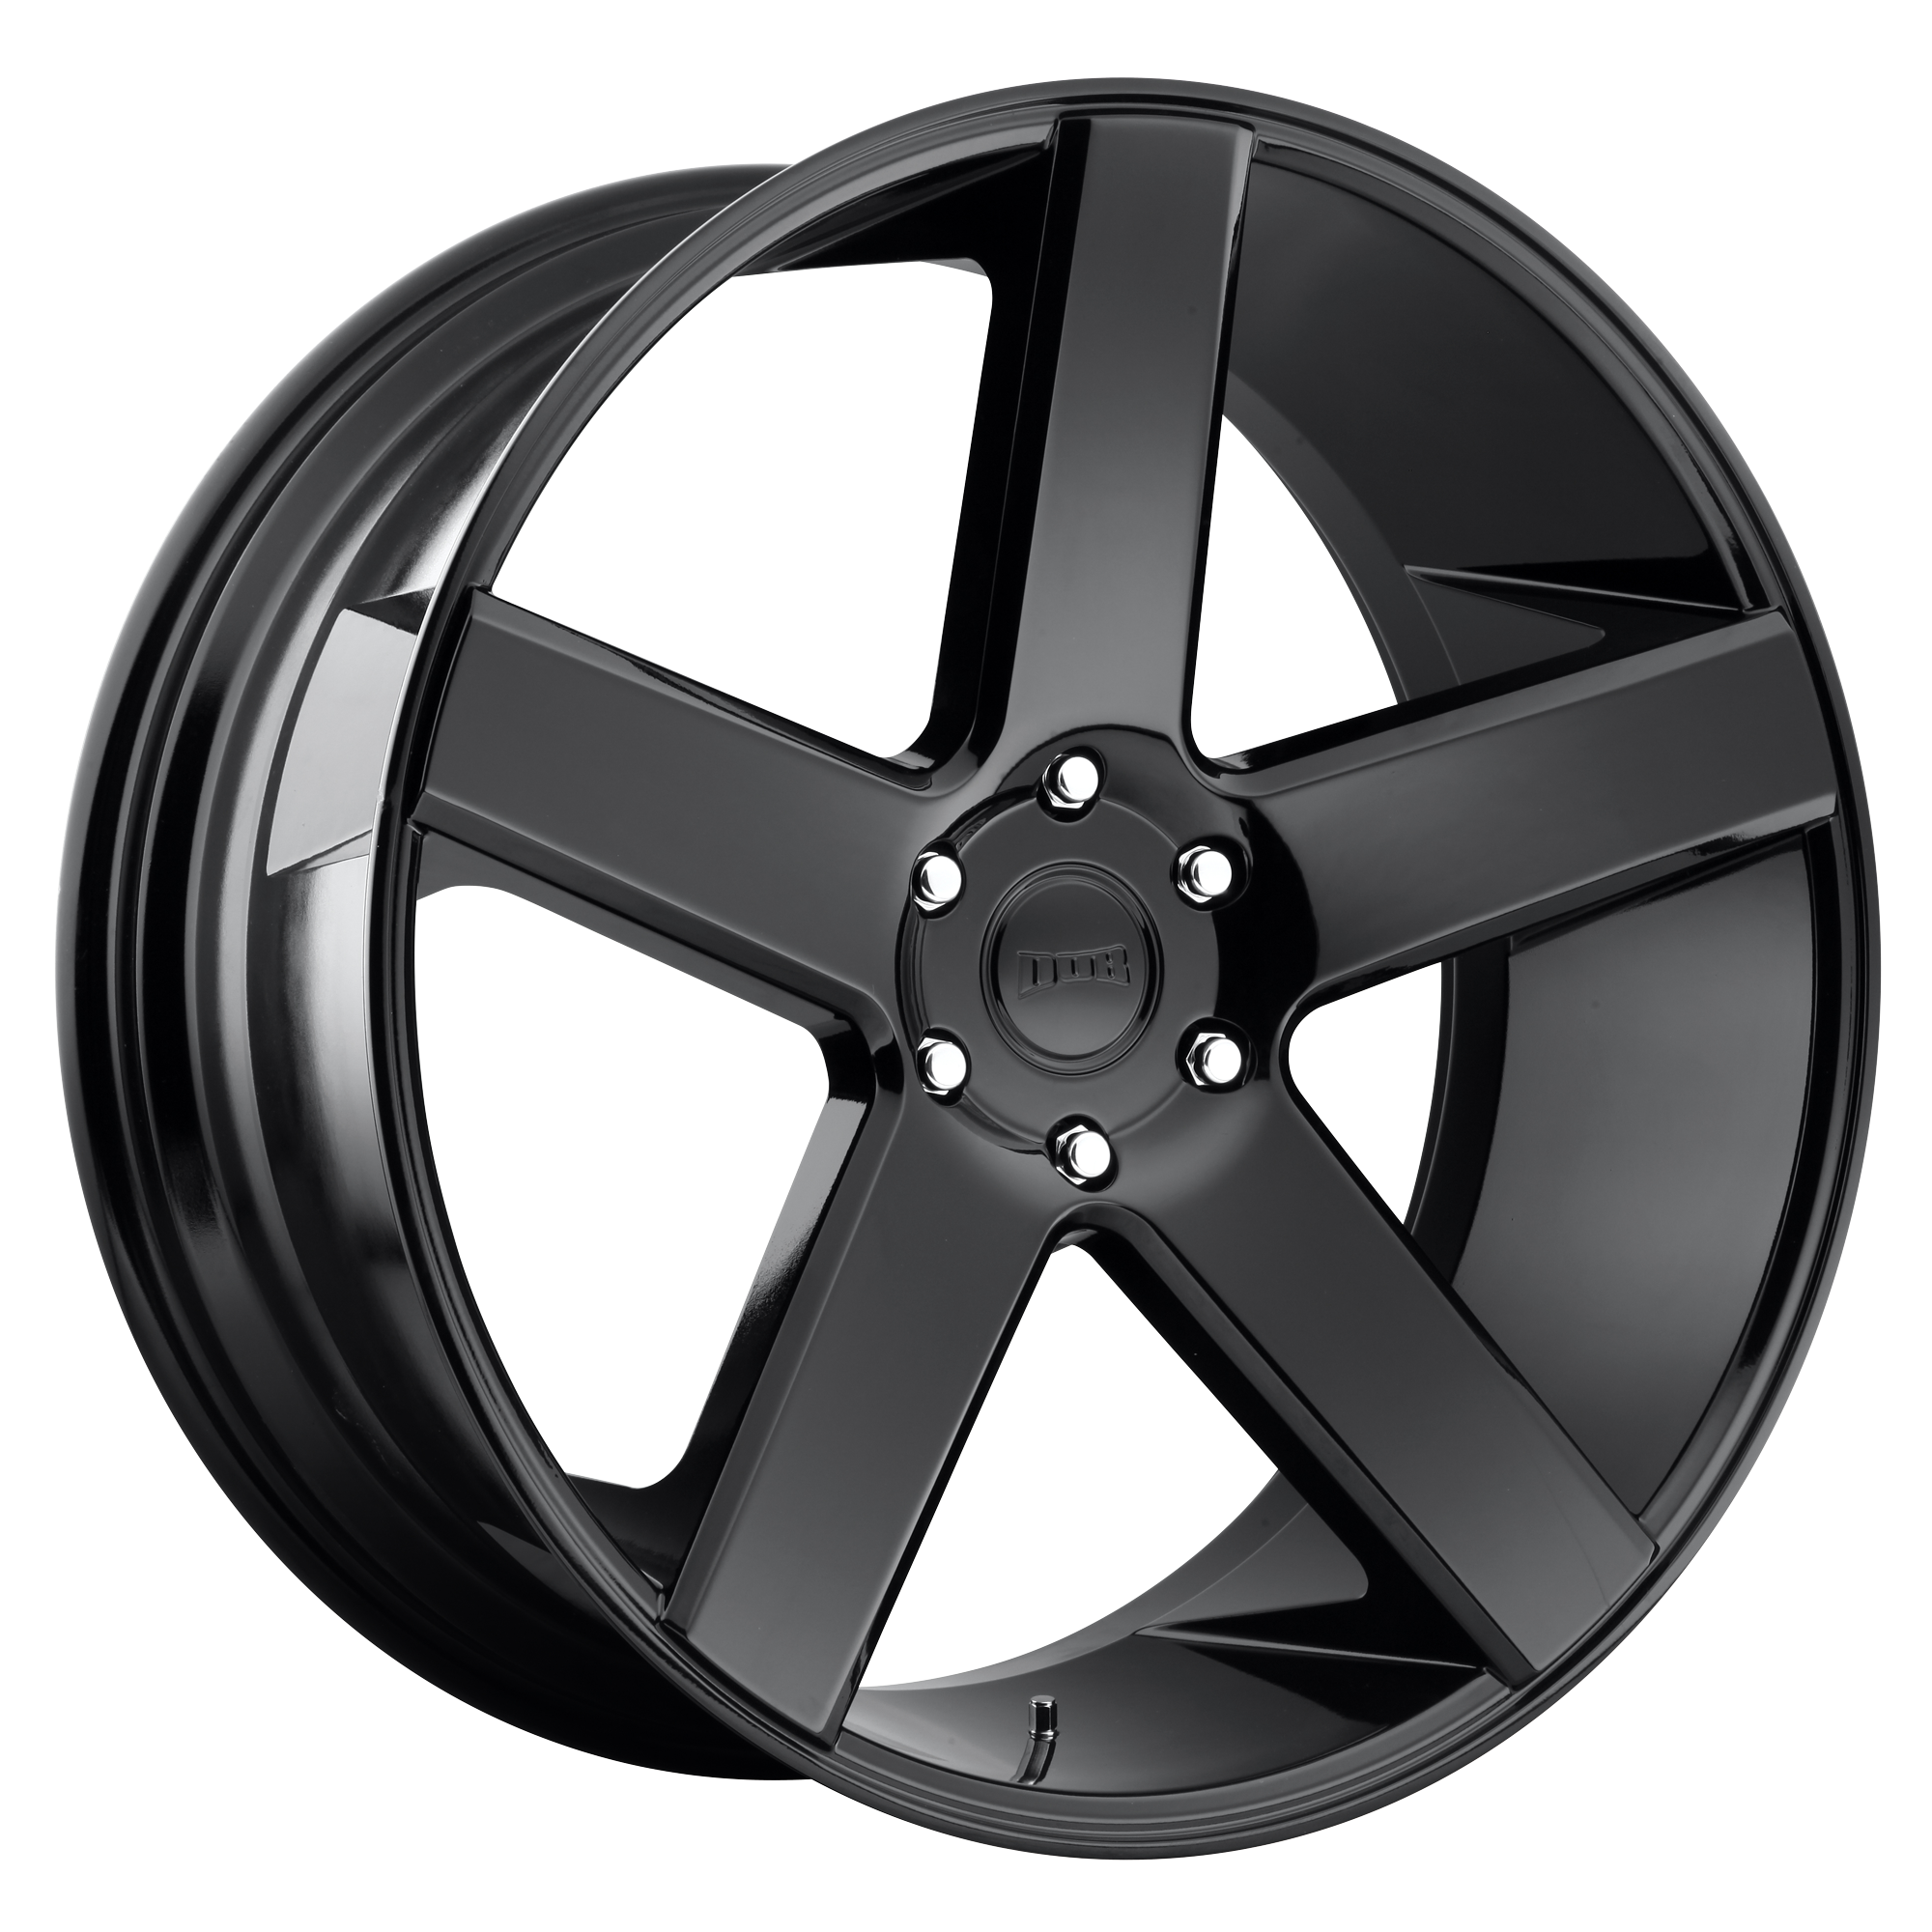 BALLER 24x10 5x115.00 GLOSS BLACK (20 mm) - Tires and Engine Performance